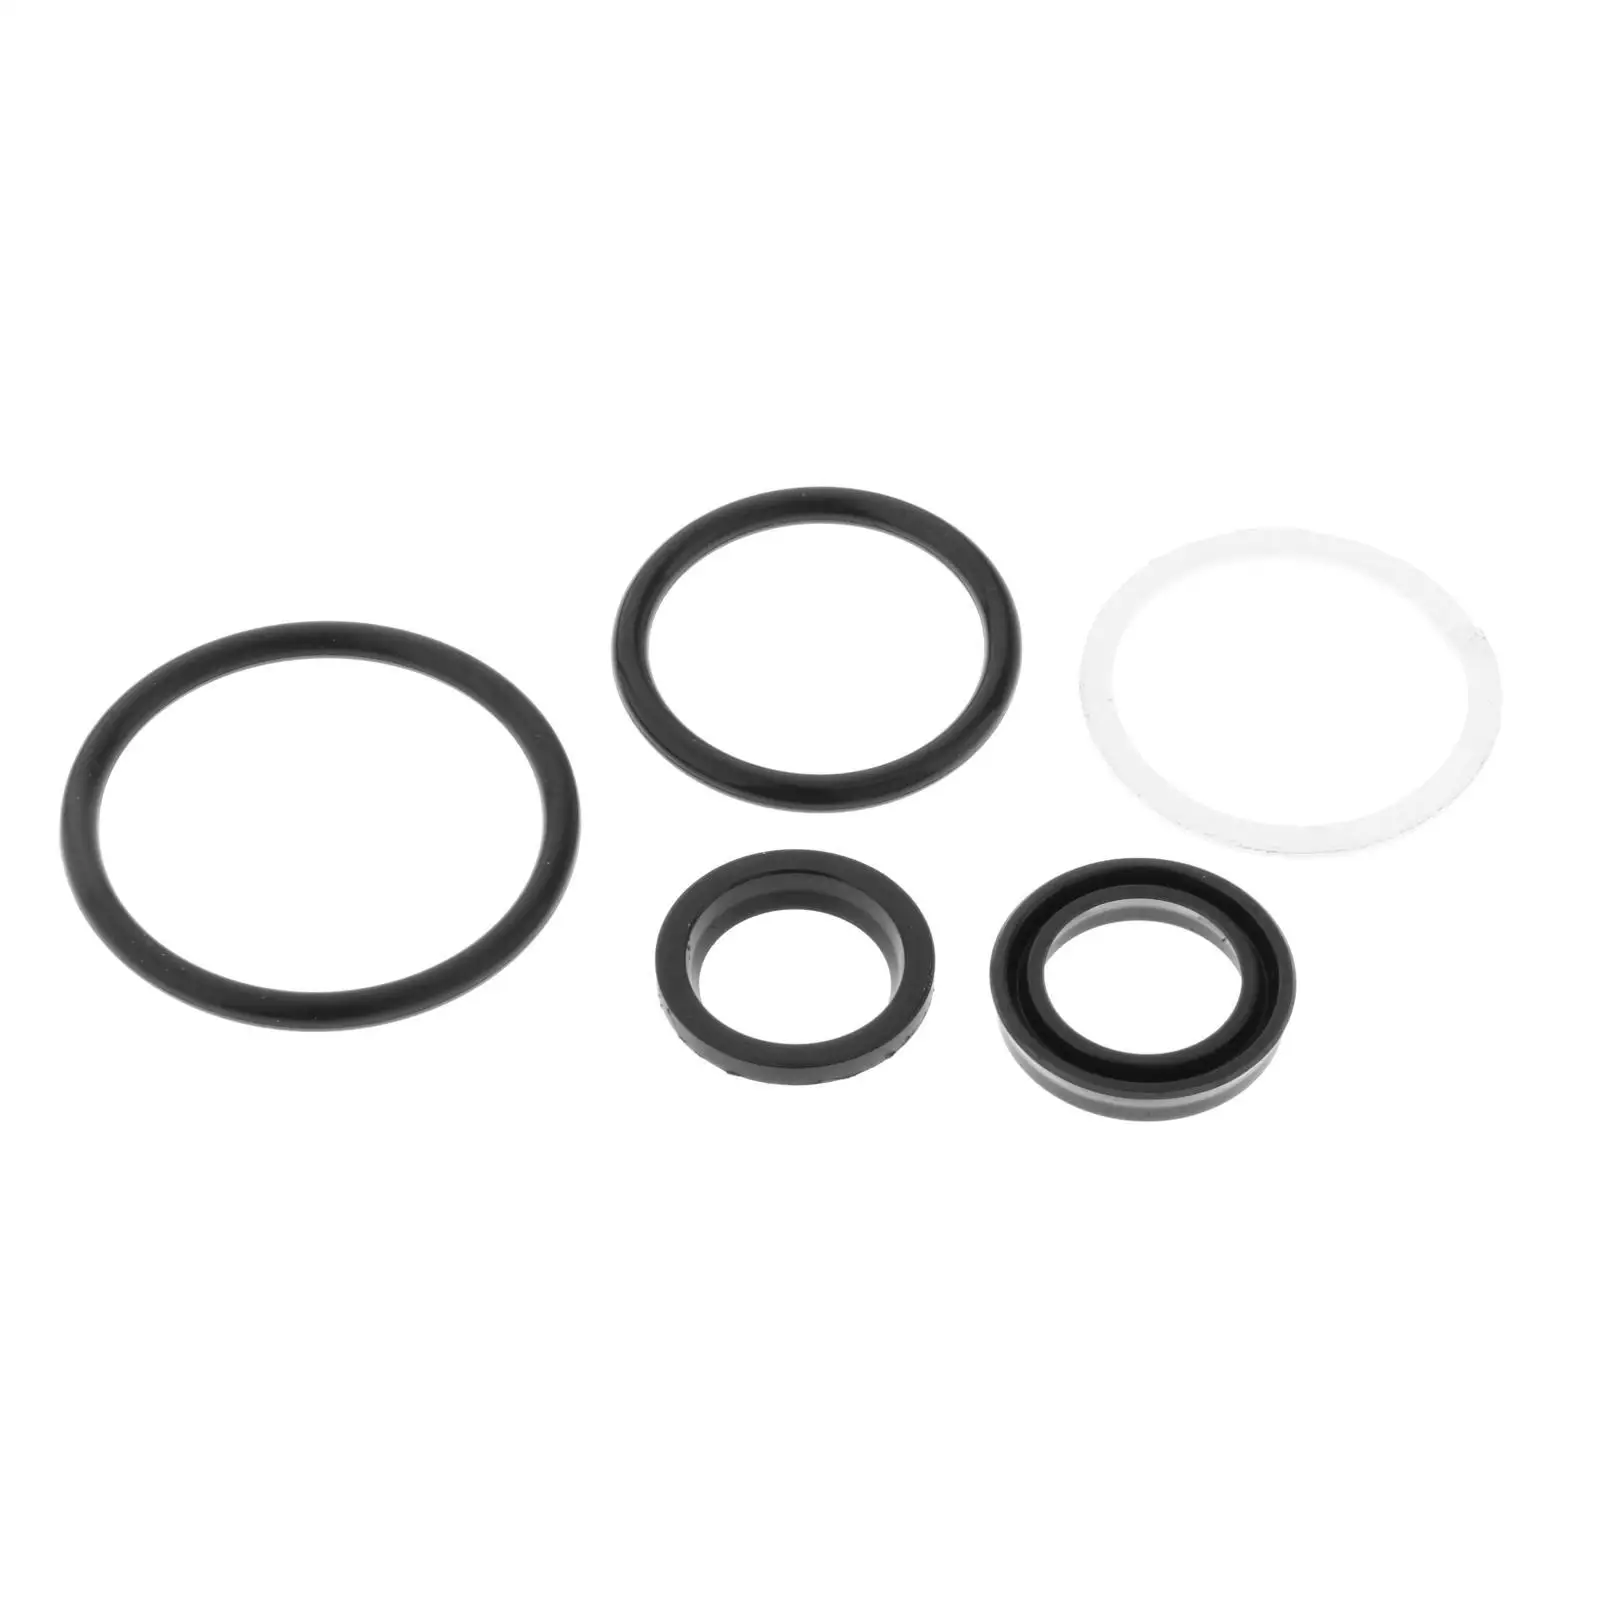 Seal and O Ring Screw Kit Seal 64E-43822-00 for Yamaha Outboard Parts